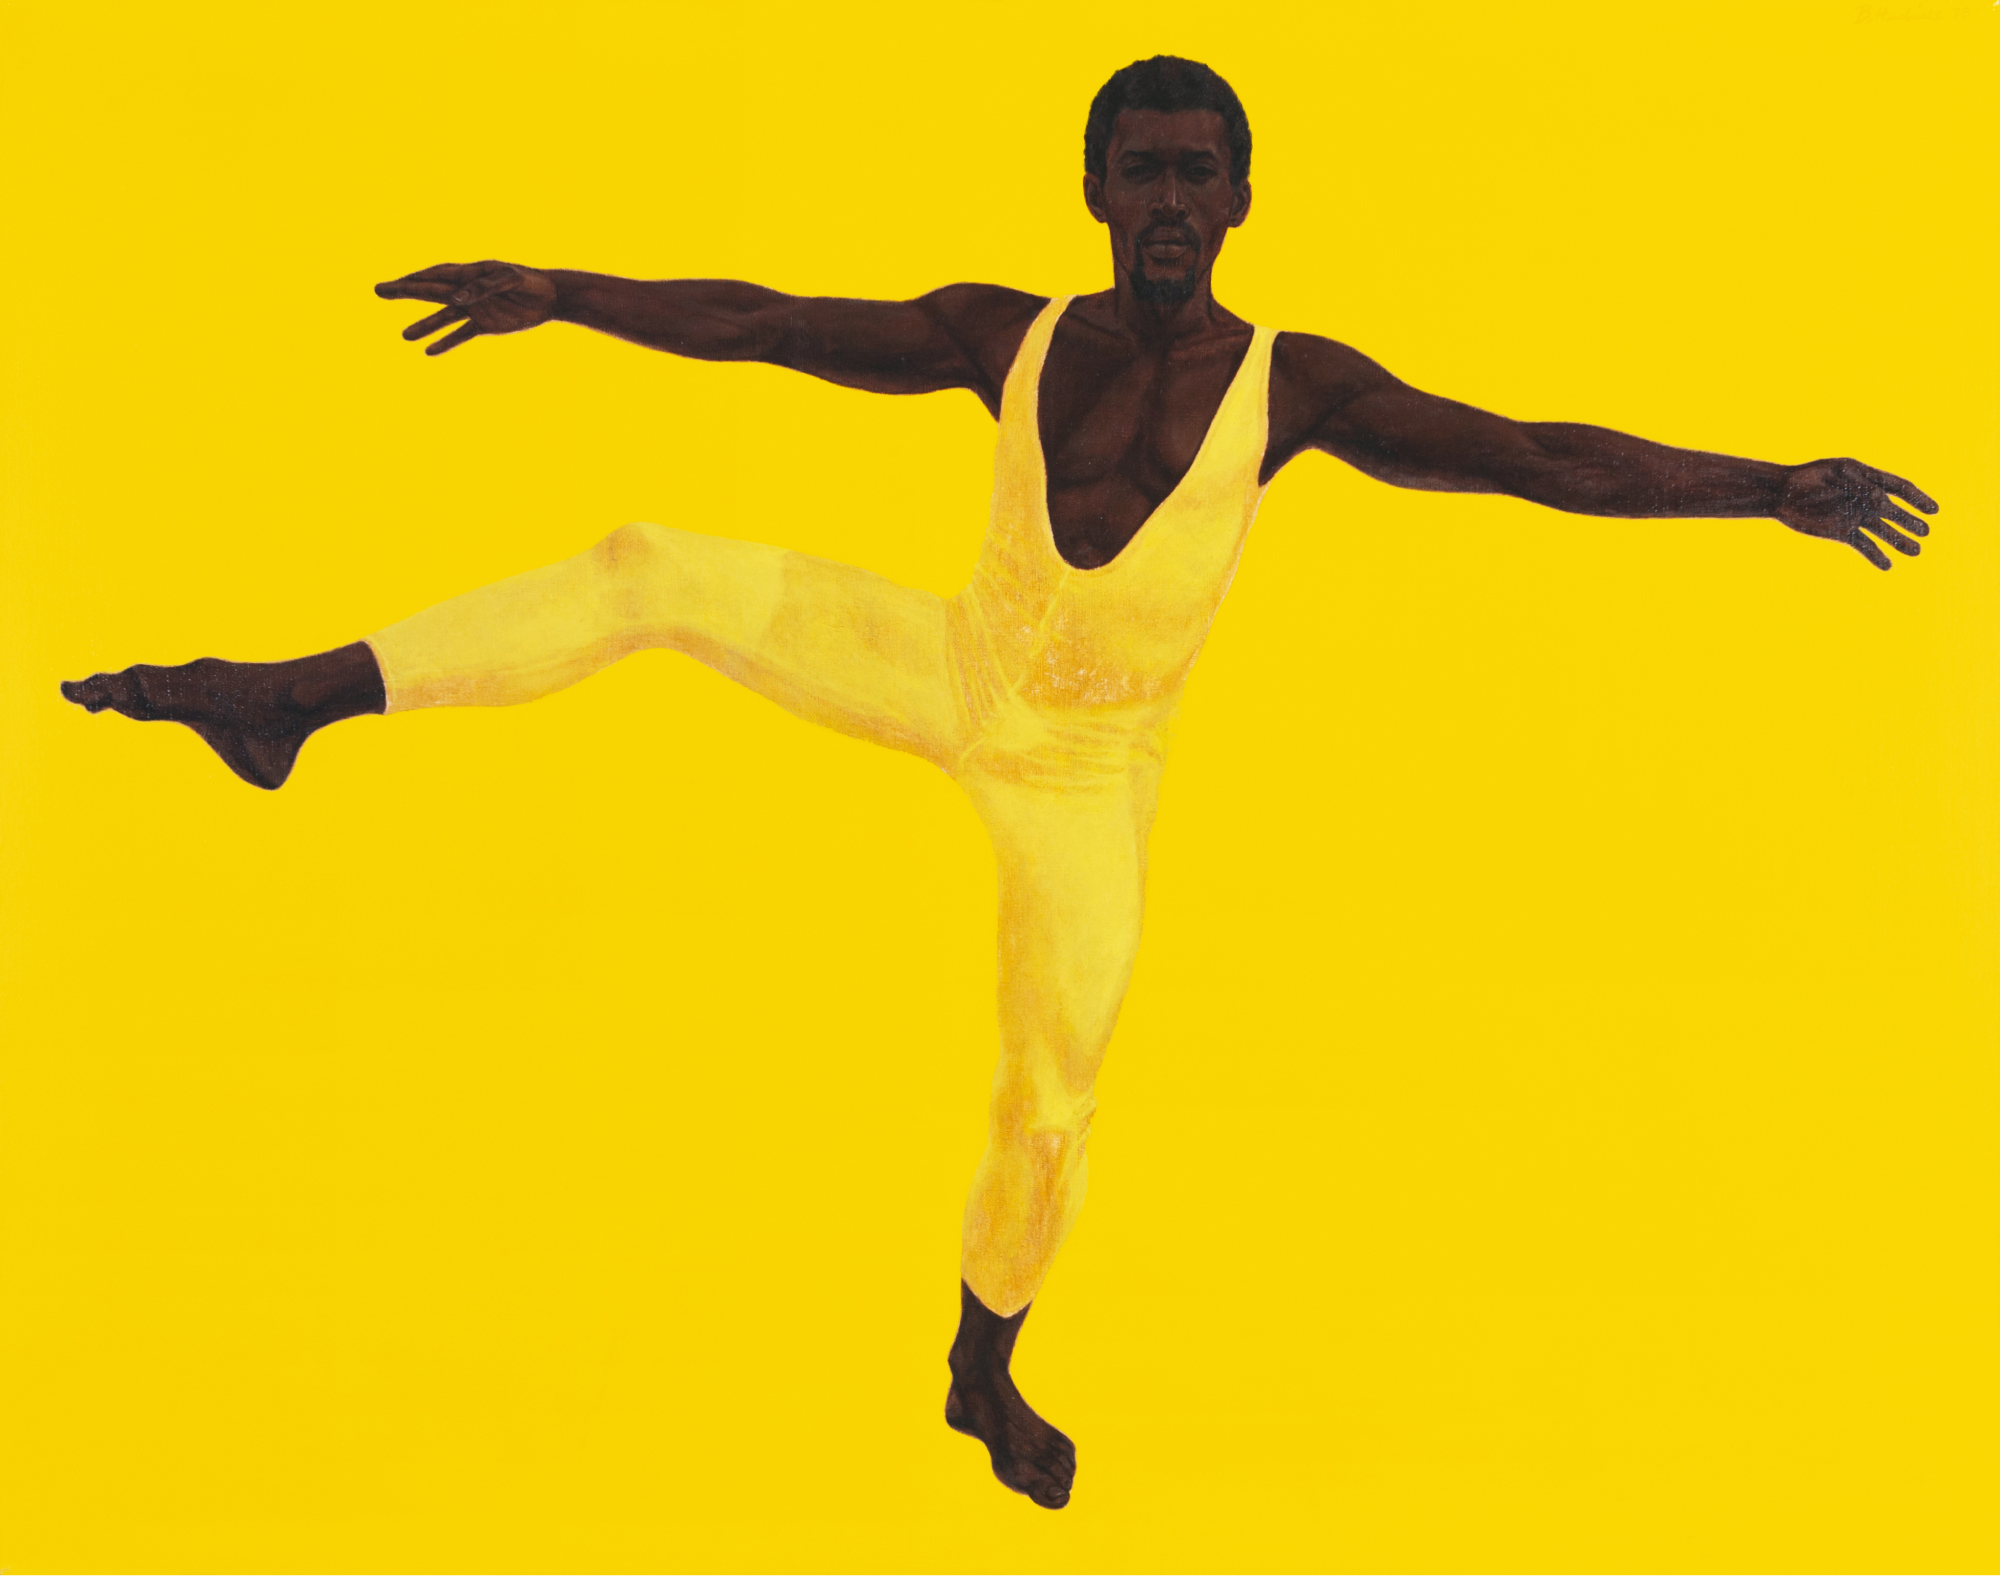 Artwork featured at Jack Shainman Gallery of a dancer wearing a yellow unitard against a yellow background.